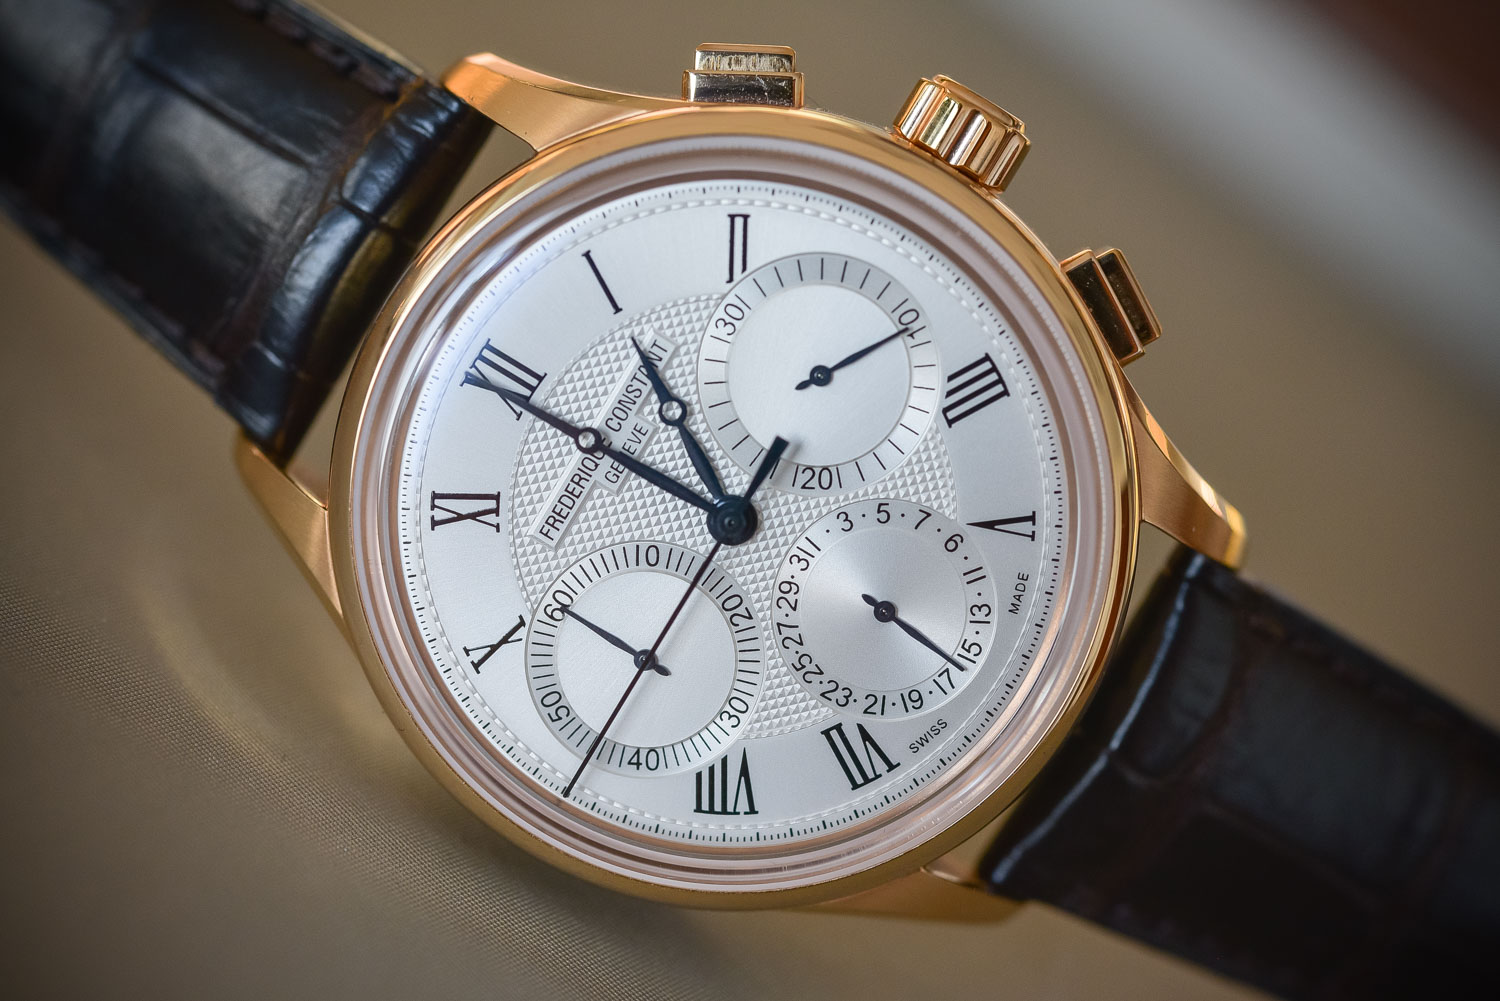 Frederique-Constant-Flyback-Chronograph-Manufacture-Baselworld-2017-7.jpg